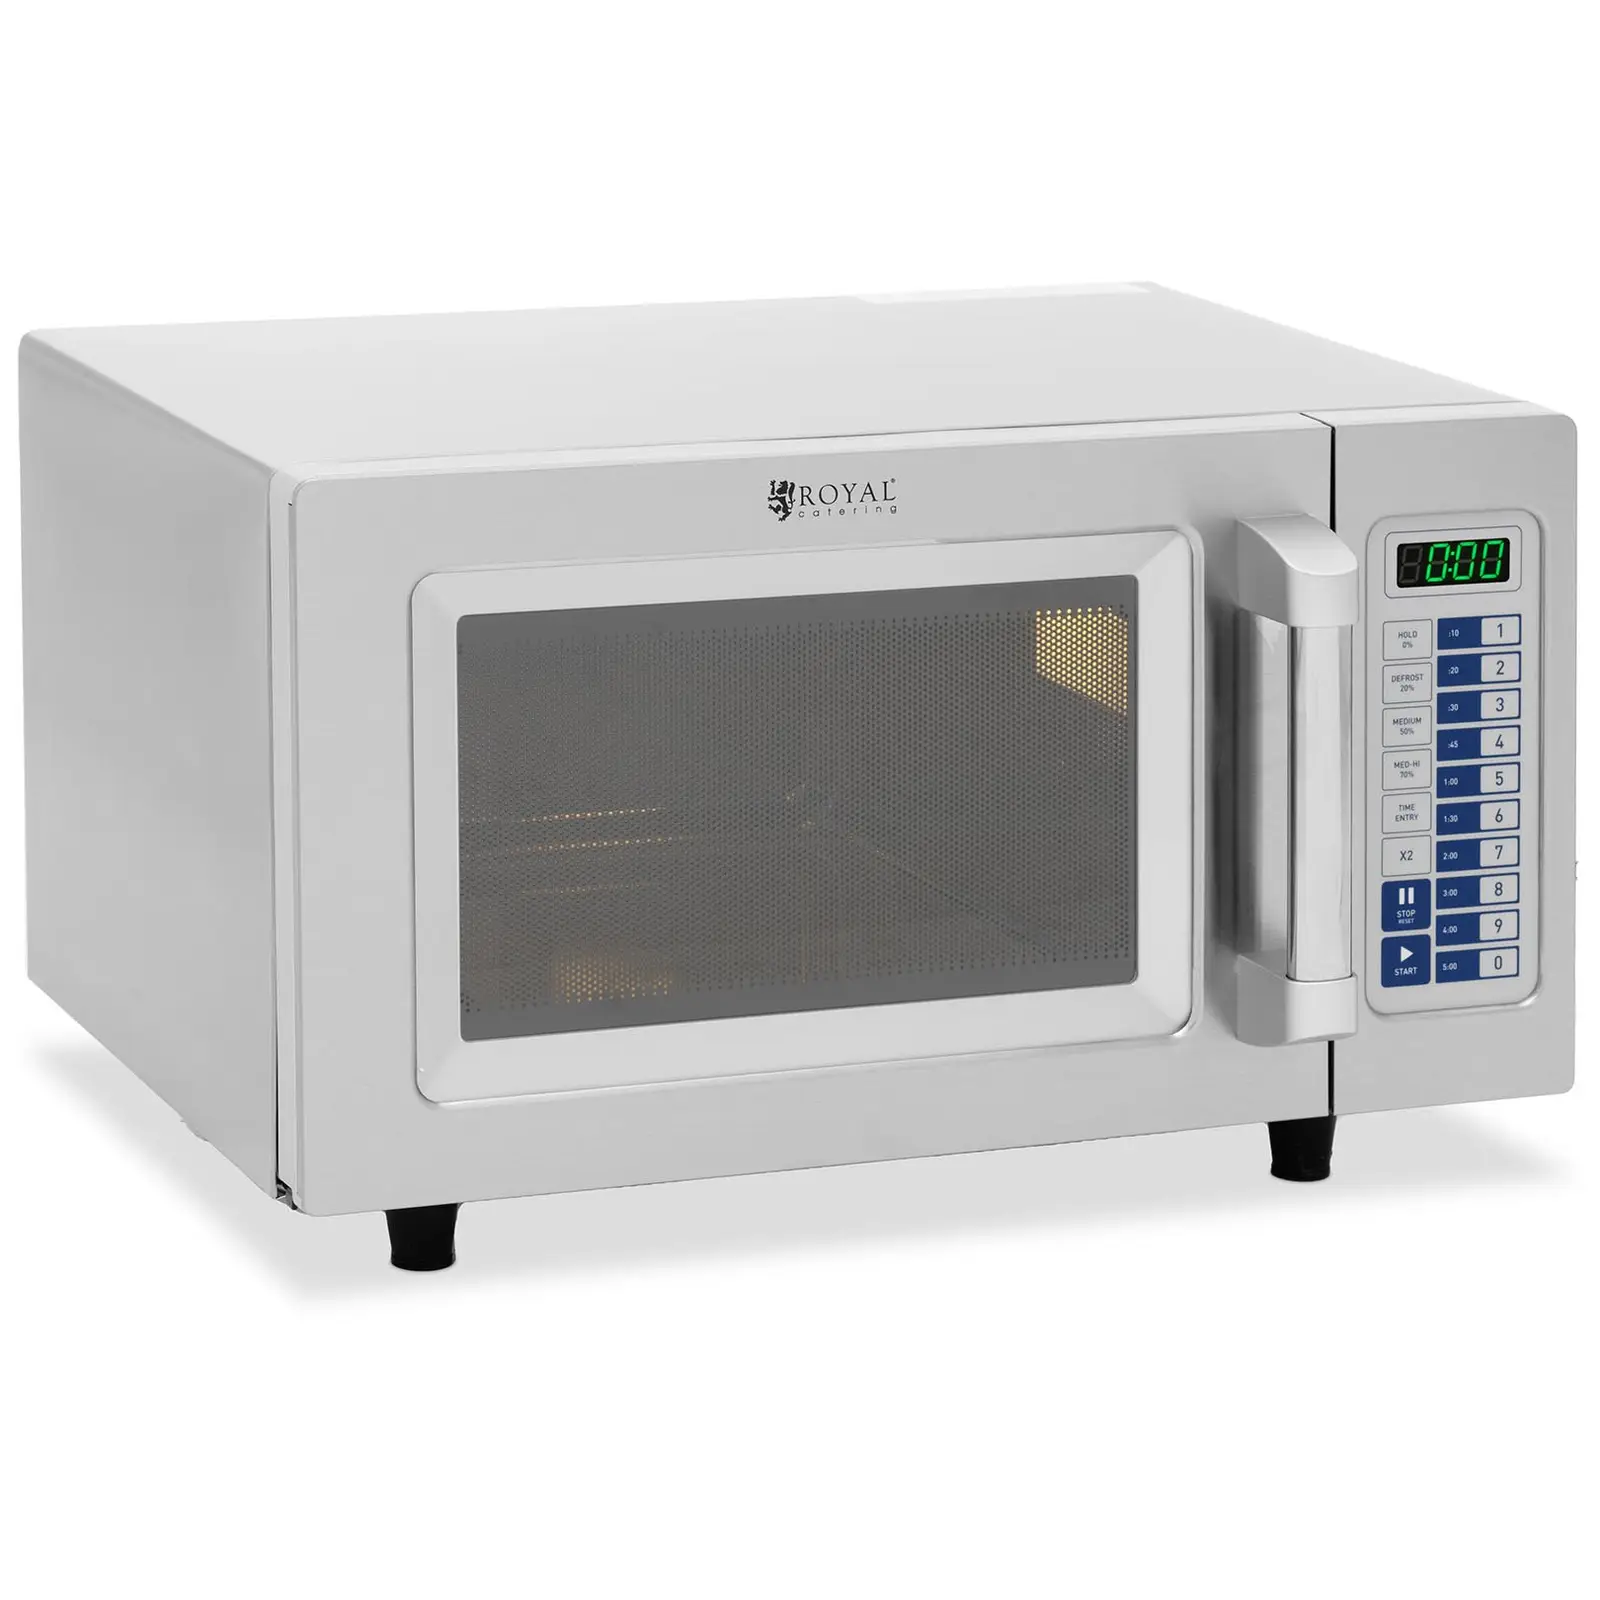 Gastro-Mikrowelle - 1550 W - 25 L - Royal Catering 